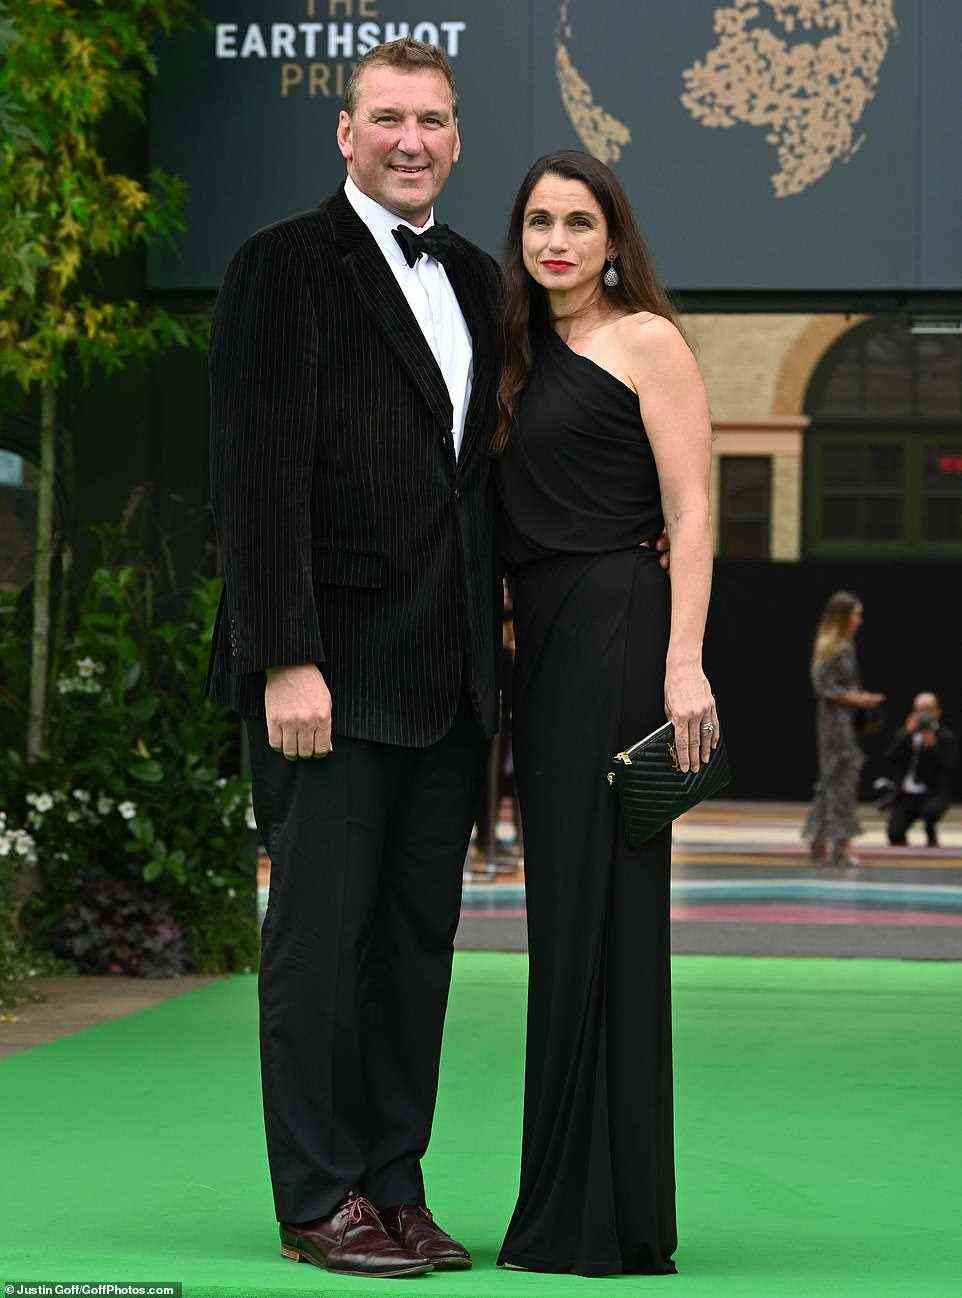 Olympic rower Sir Matthew Clive Pinsent was joined by is glamorous wife Demetra, the CEO of cosmetic giant Charlotte Tilbury who is said to have helped Kate Middleton overhaul her image following the birth of Princess Charlotte.